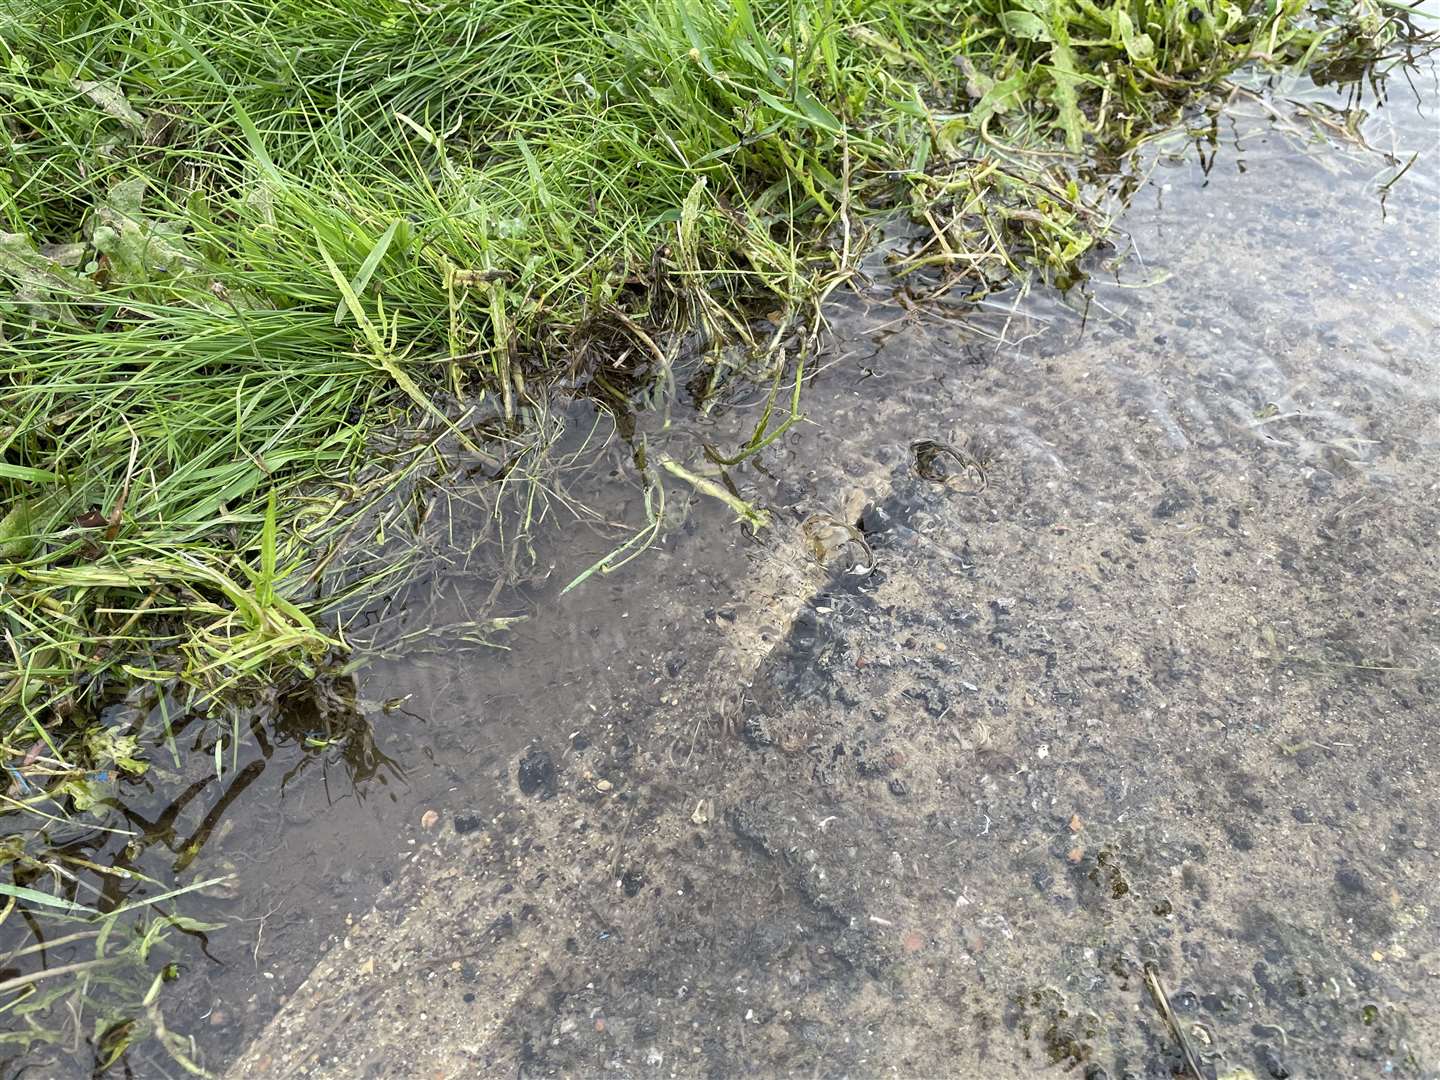 Water can be seen flowing from two places on the pavement